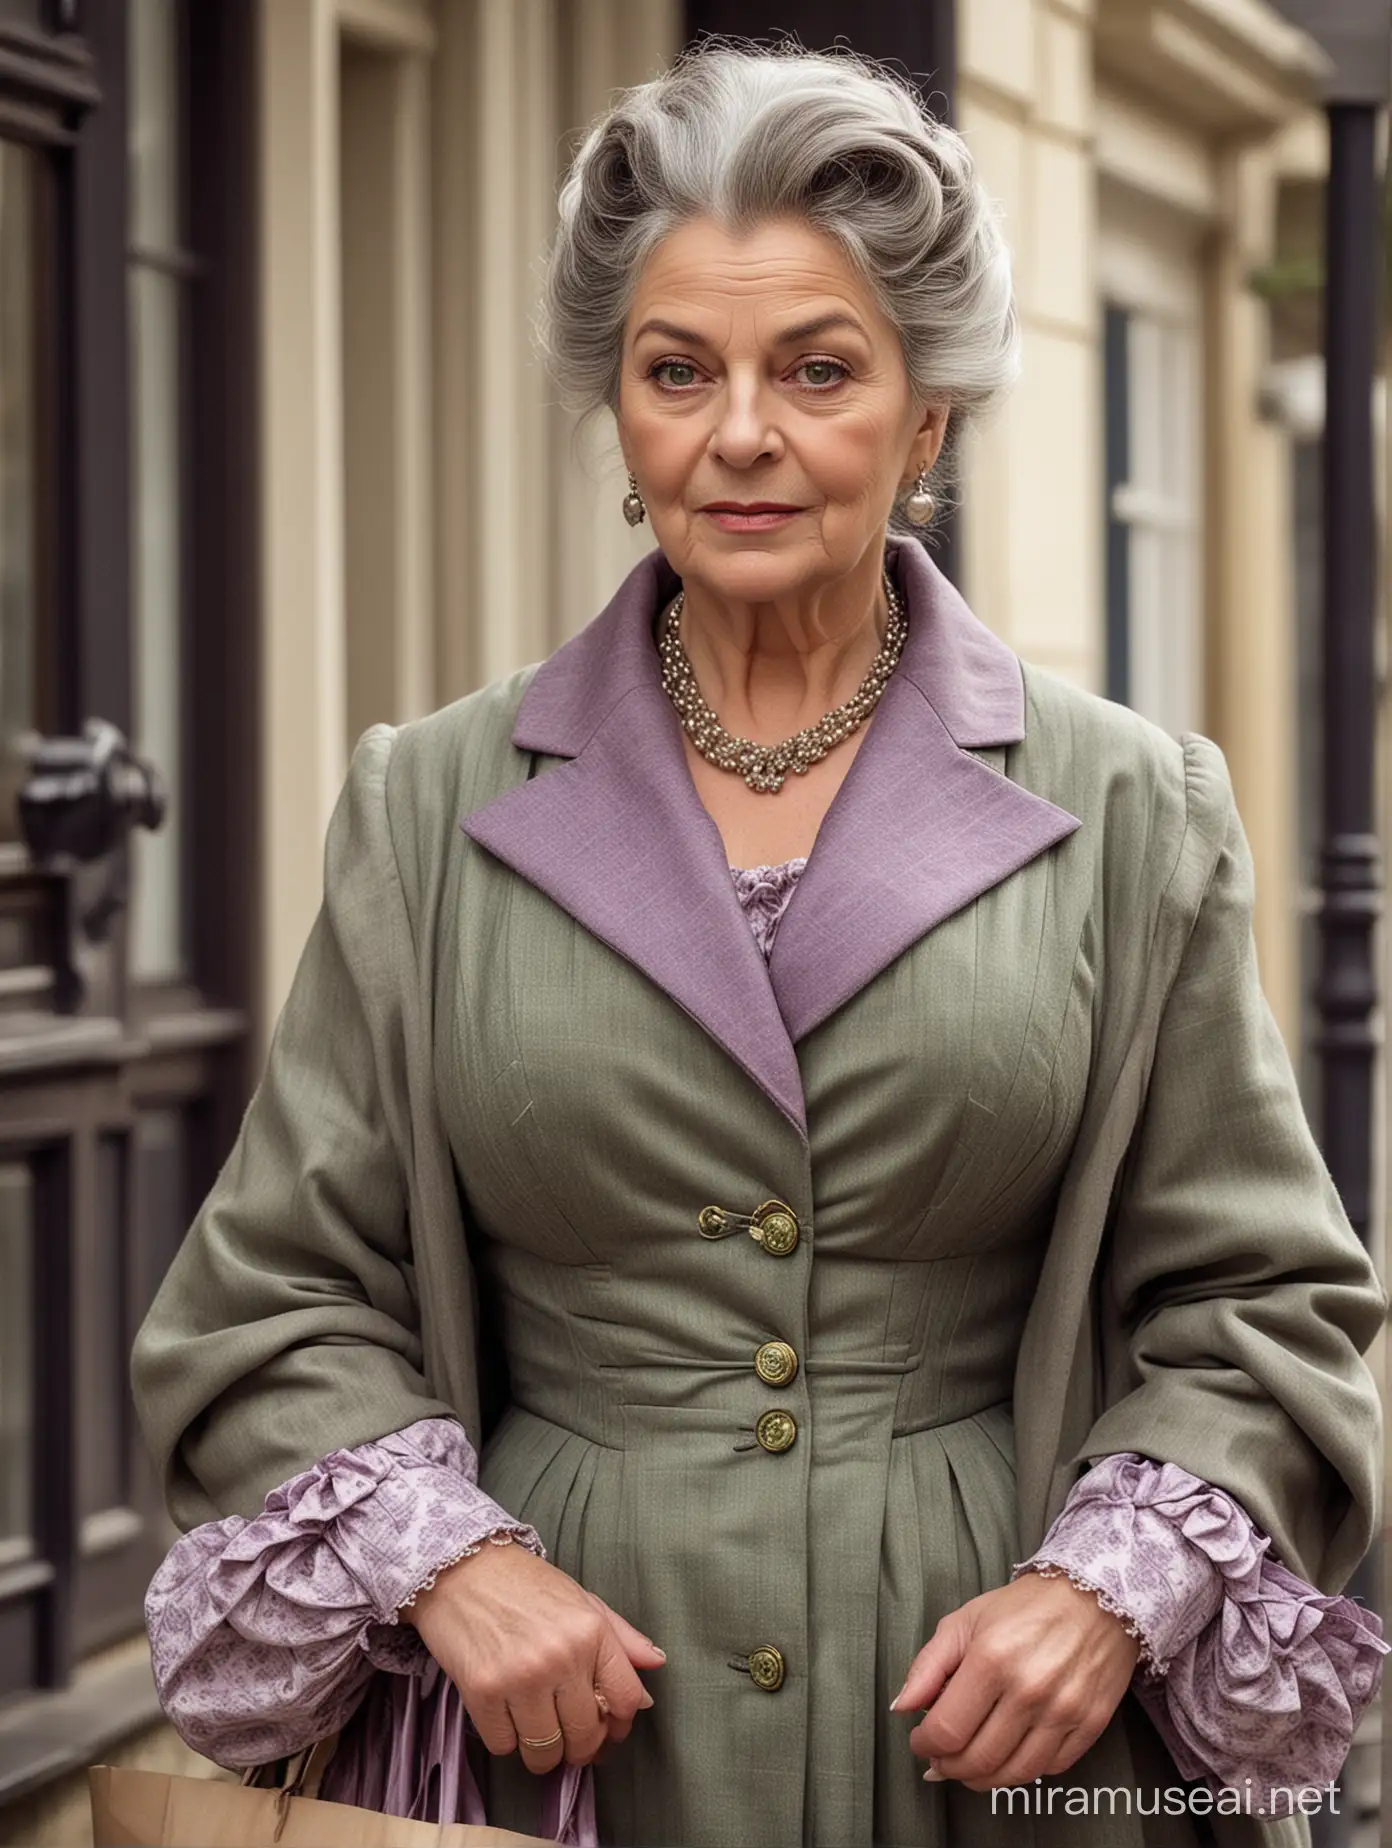 Aunt is an elderly old fashioned lady: She is the strict owner of the boardinghouse, a broad big Madame, she is dressed old fashioned elegant. In a bourgeois style. She is voluptuous with warmth and a huge bosom. Her hair is grey and purple. Stern green eyes.
Standing in nice dress and a coat outdoor on her way to shopping 